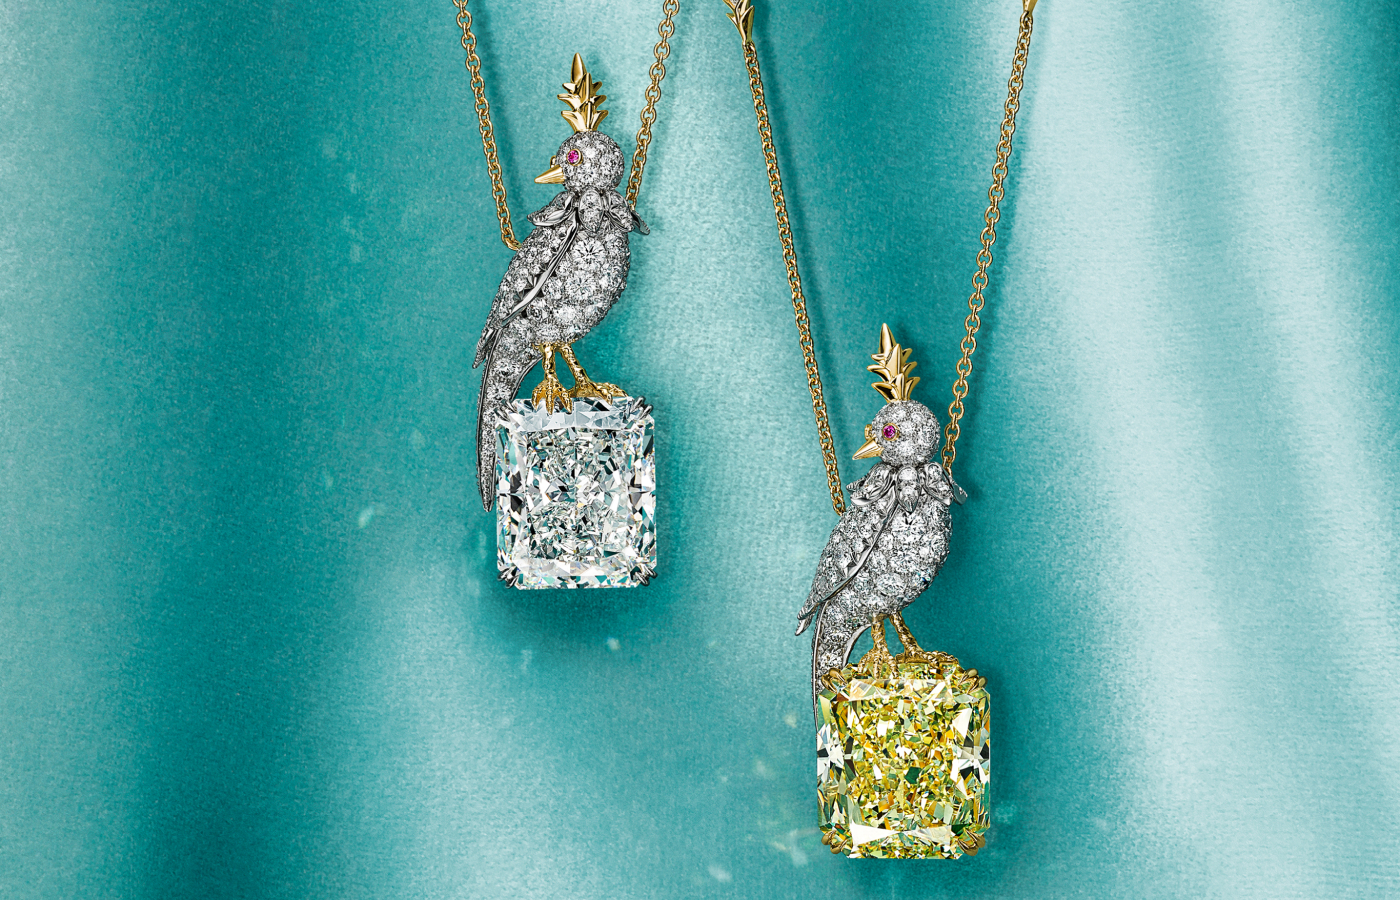 Tiffany & Co. Bird on a Rock pendants in gold, yellow gold, ruby, featuring yellow and white diamonds